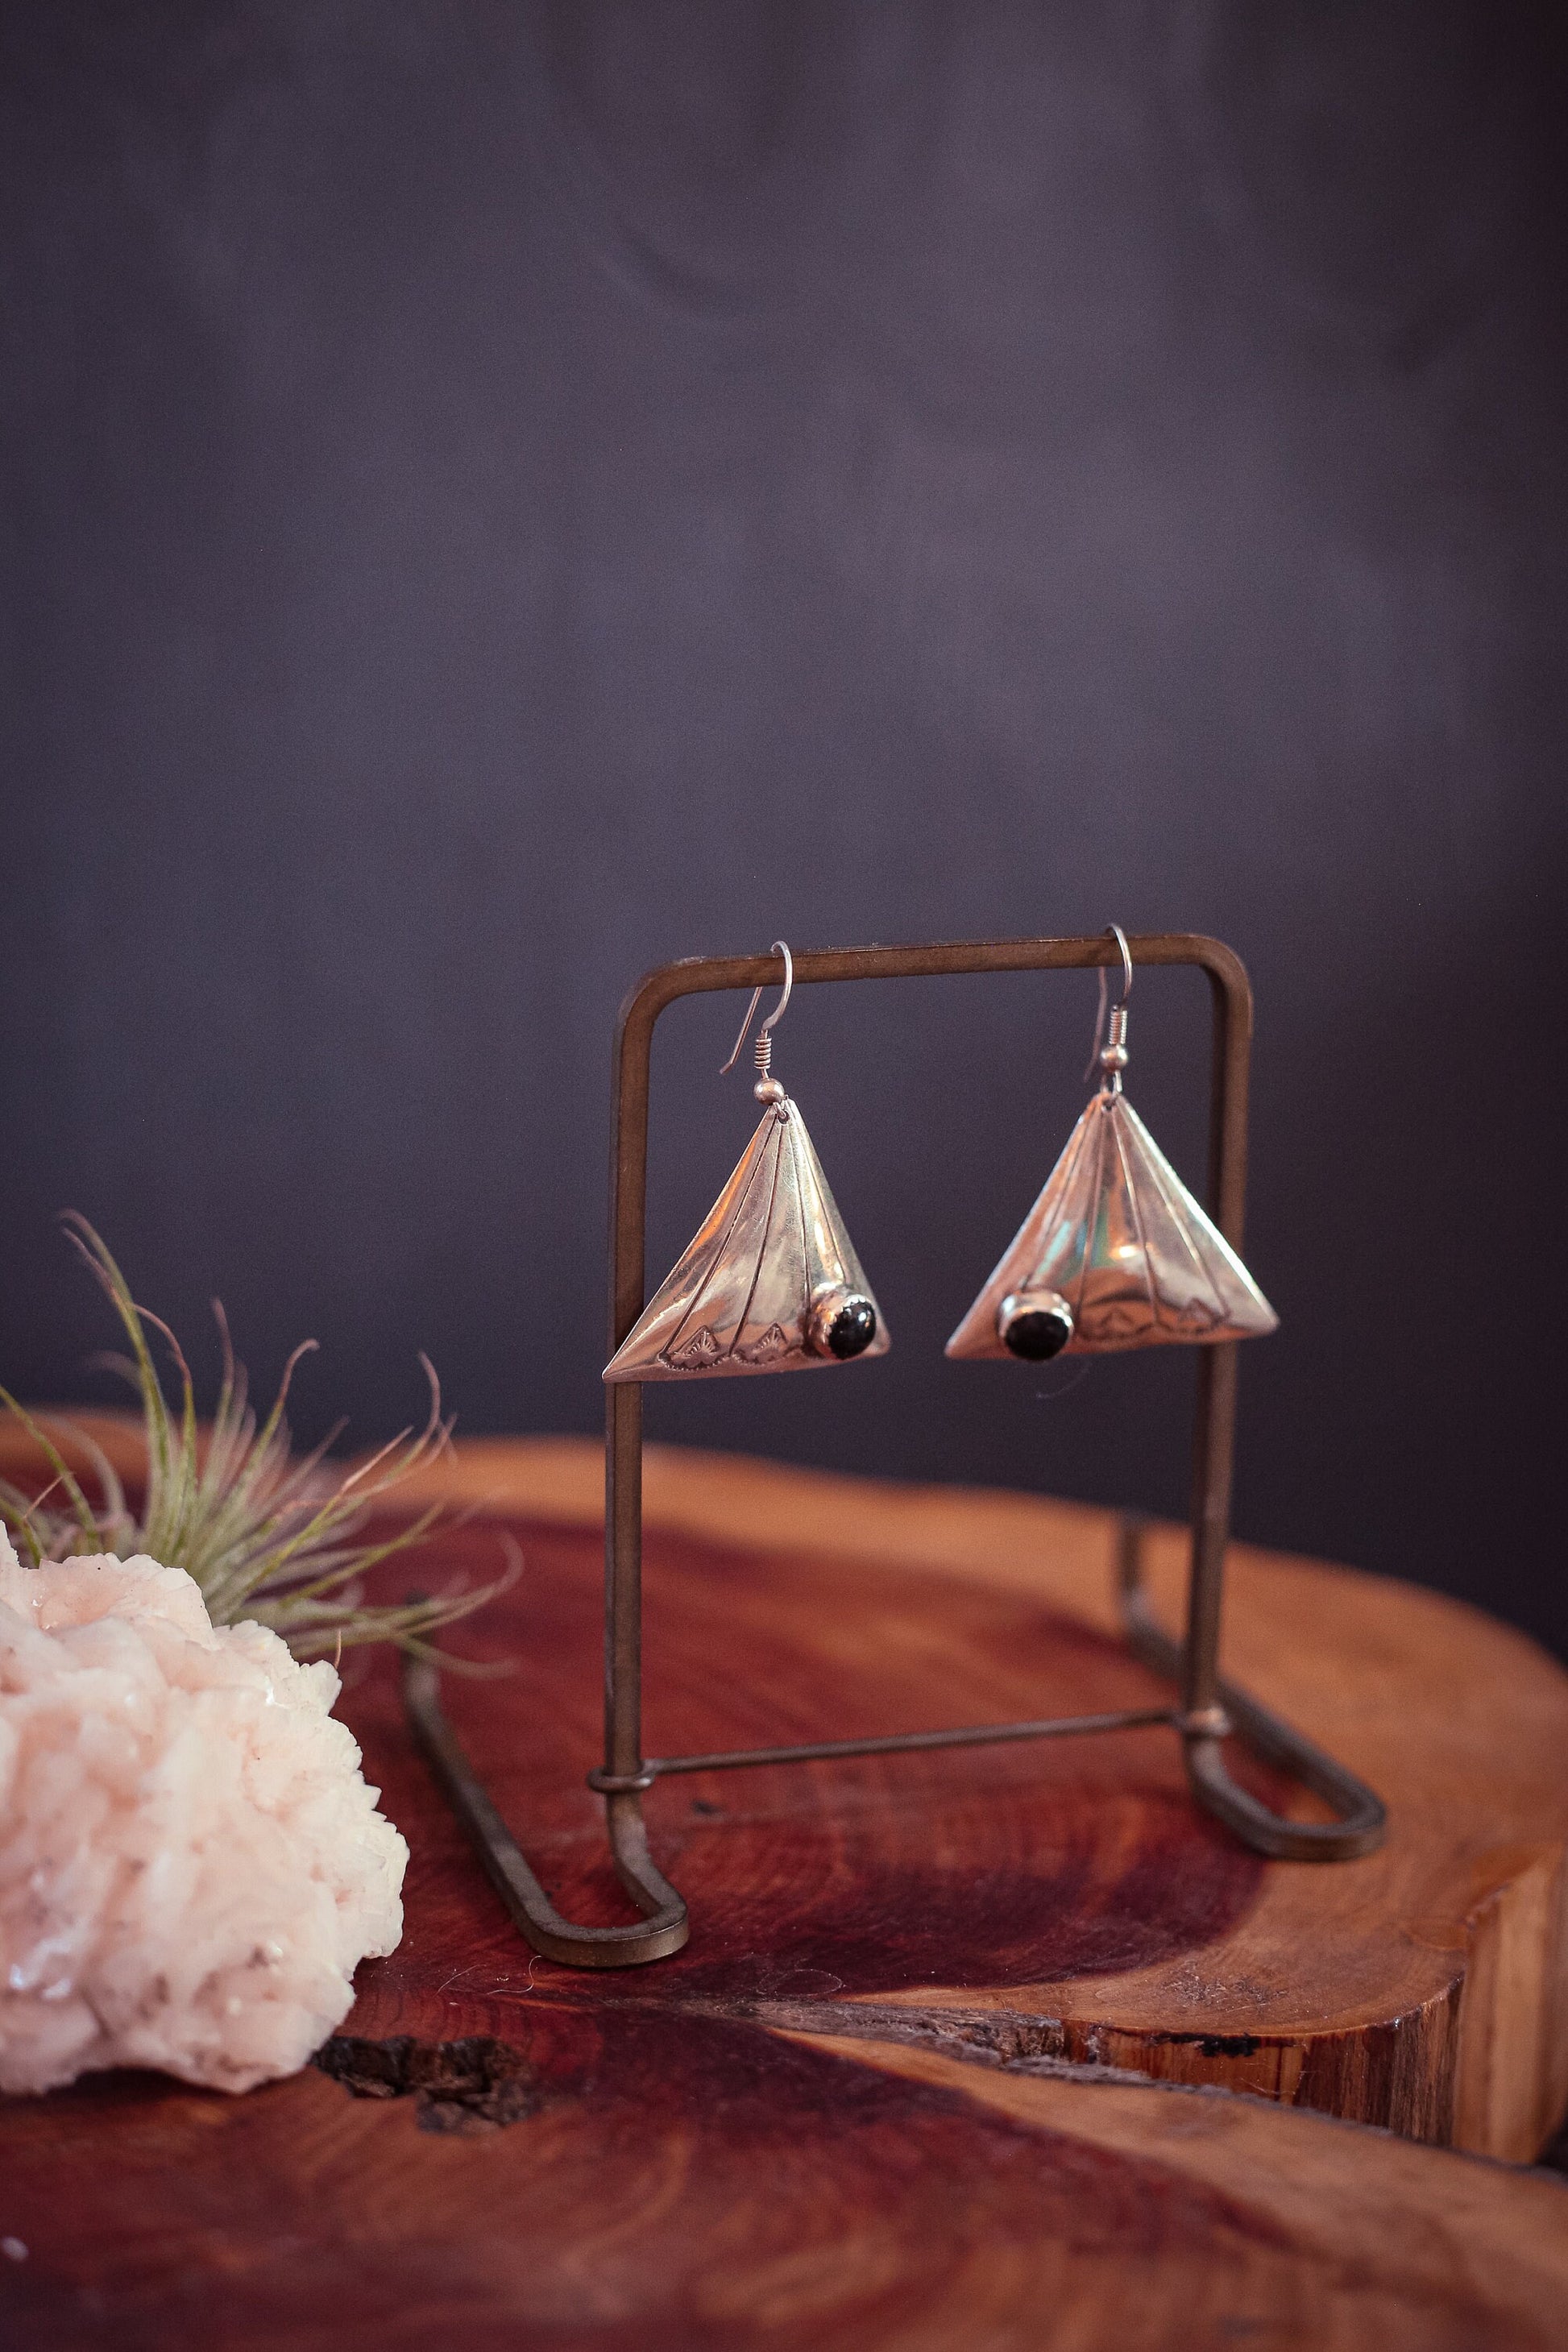 Sterling Silver and Onyx Triangle Drop Earrings - Vintage Silver Earring